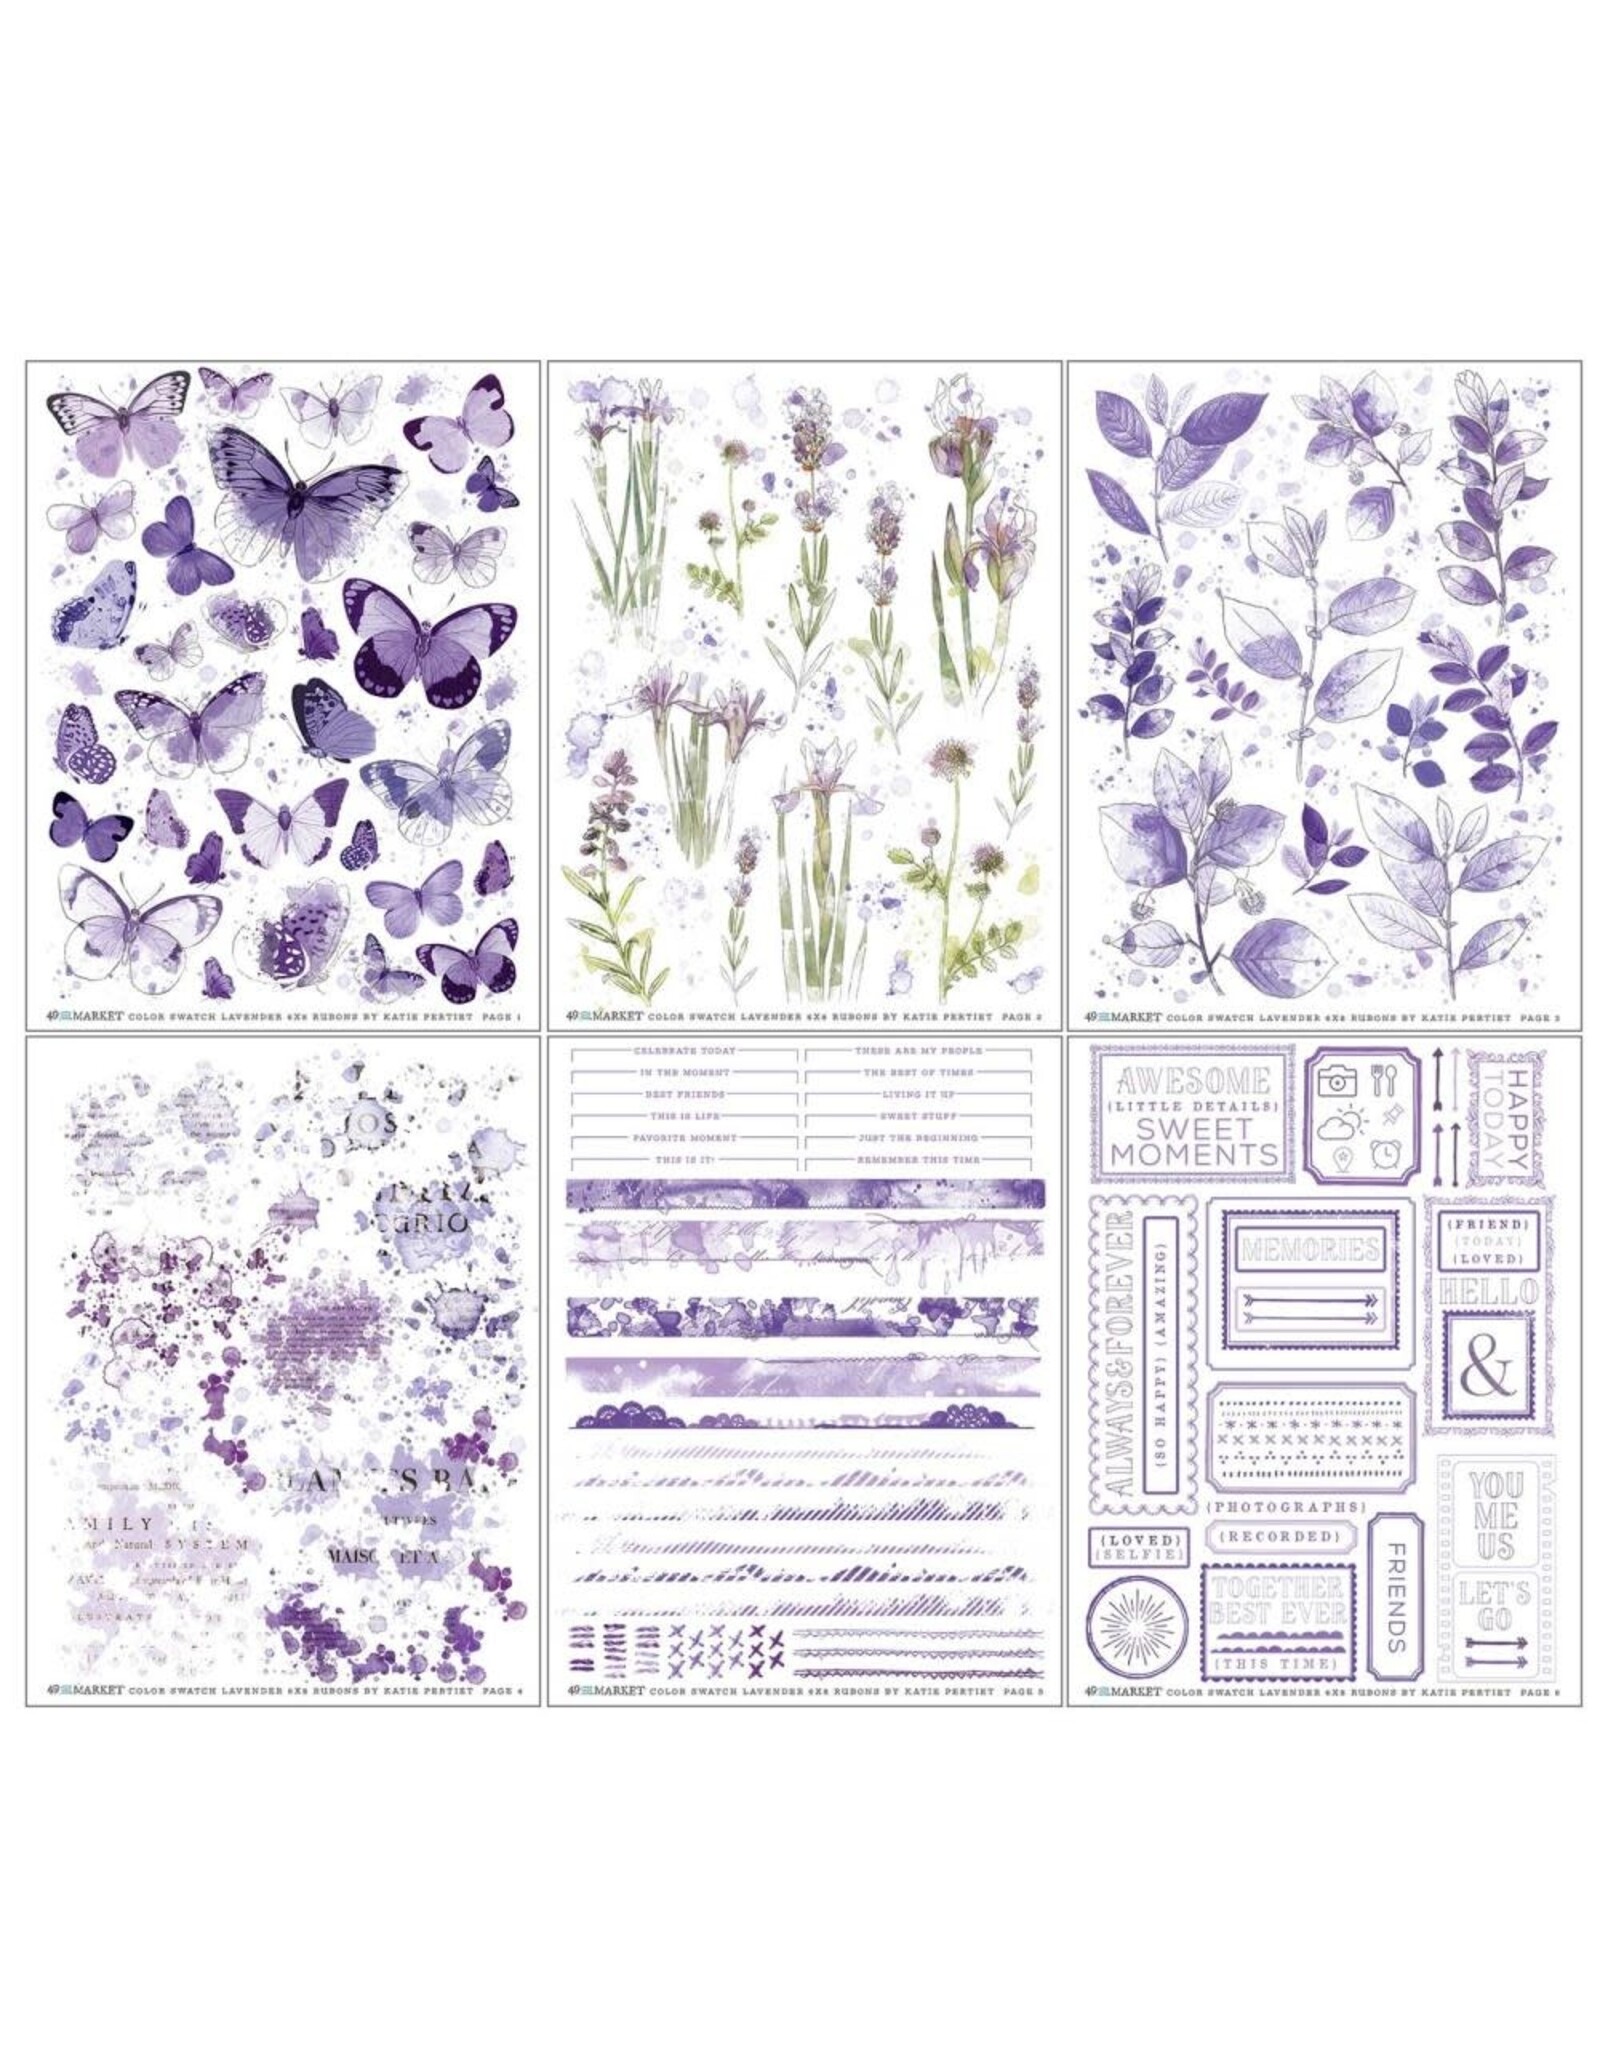 49 AND MARKET 49 AND MARKET COLOR SWATCH LAVENDER 6x8 RUB-ON TRANSFER SET 6/PK